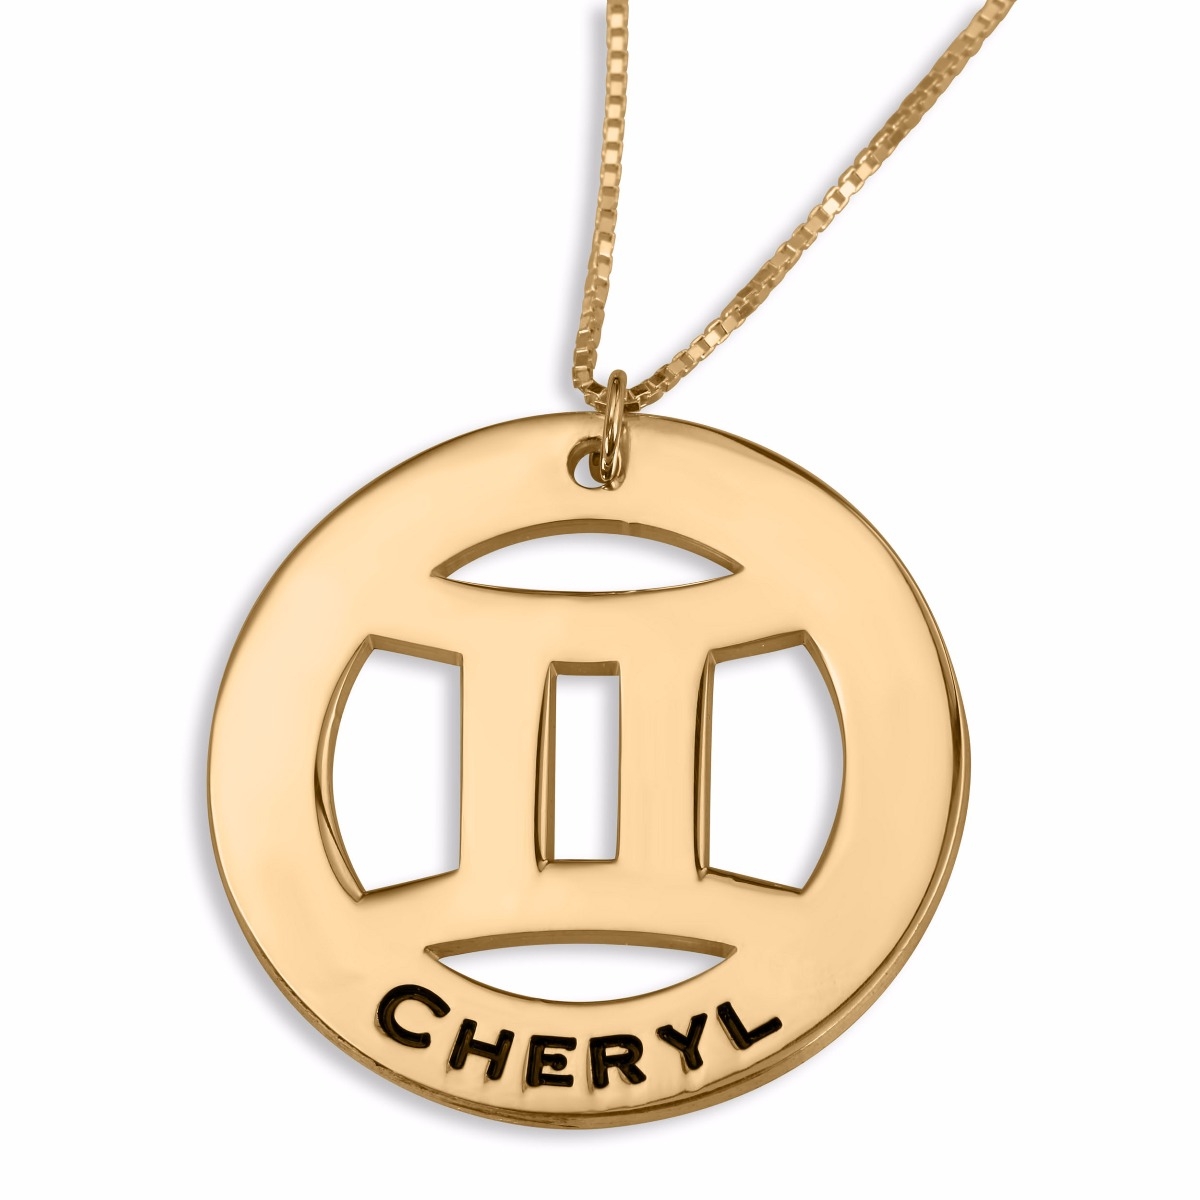 Hebrew Name Necklace Double Thickness Gold-Plated Gemini Zodiac Name Necklace (English/Hebrew)  - 1